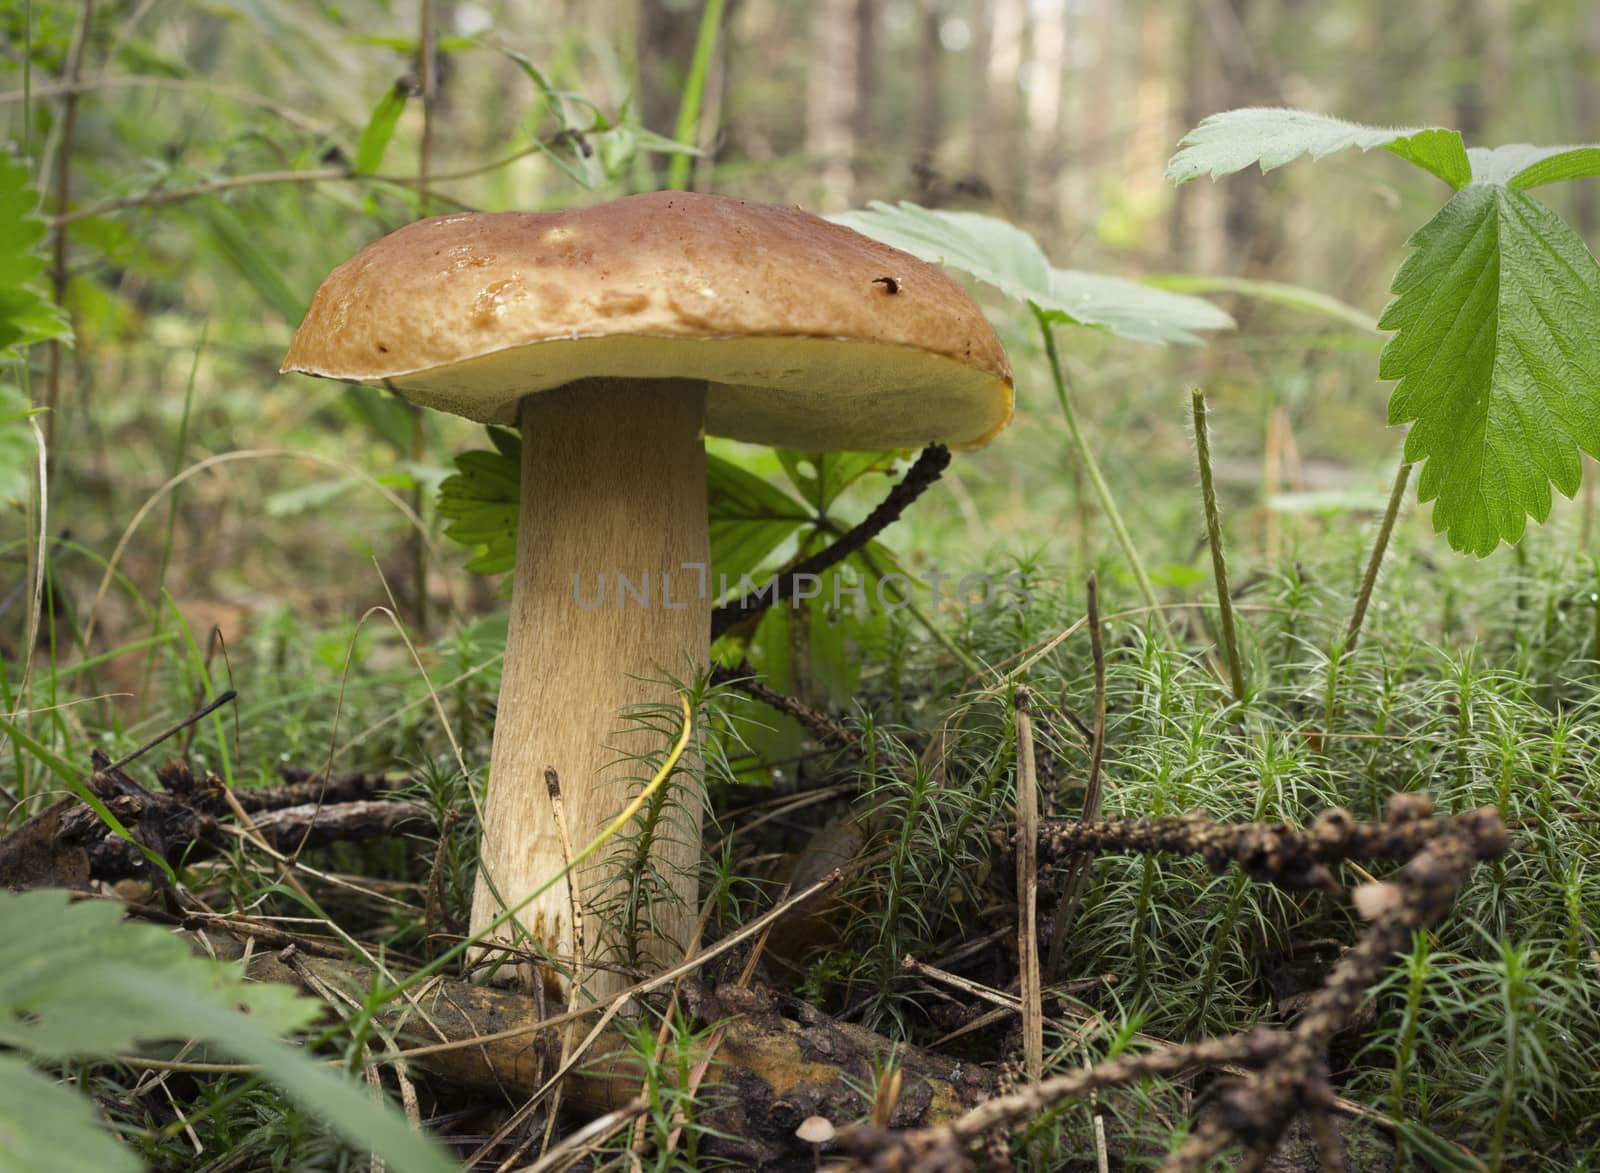 One mushroom boletus on the moss in the summer forest